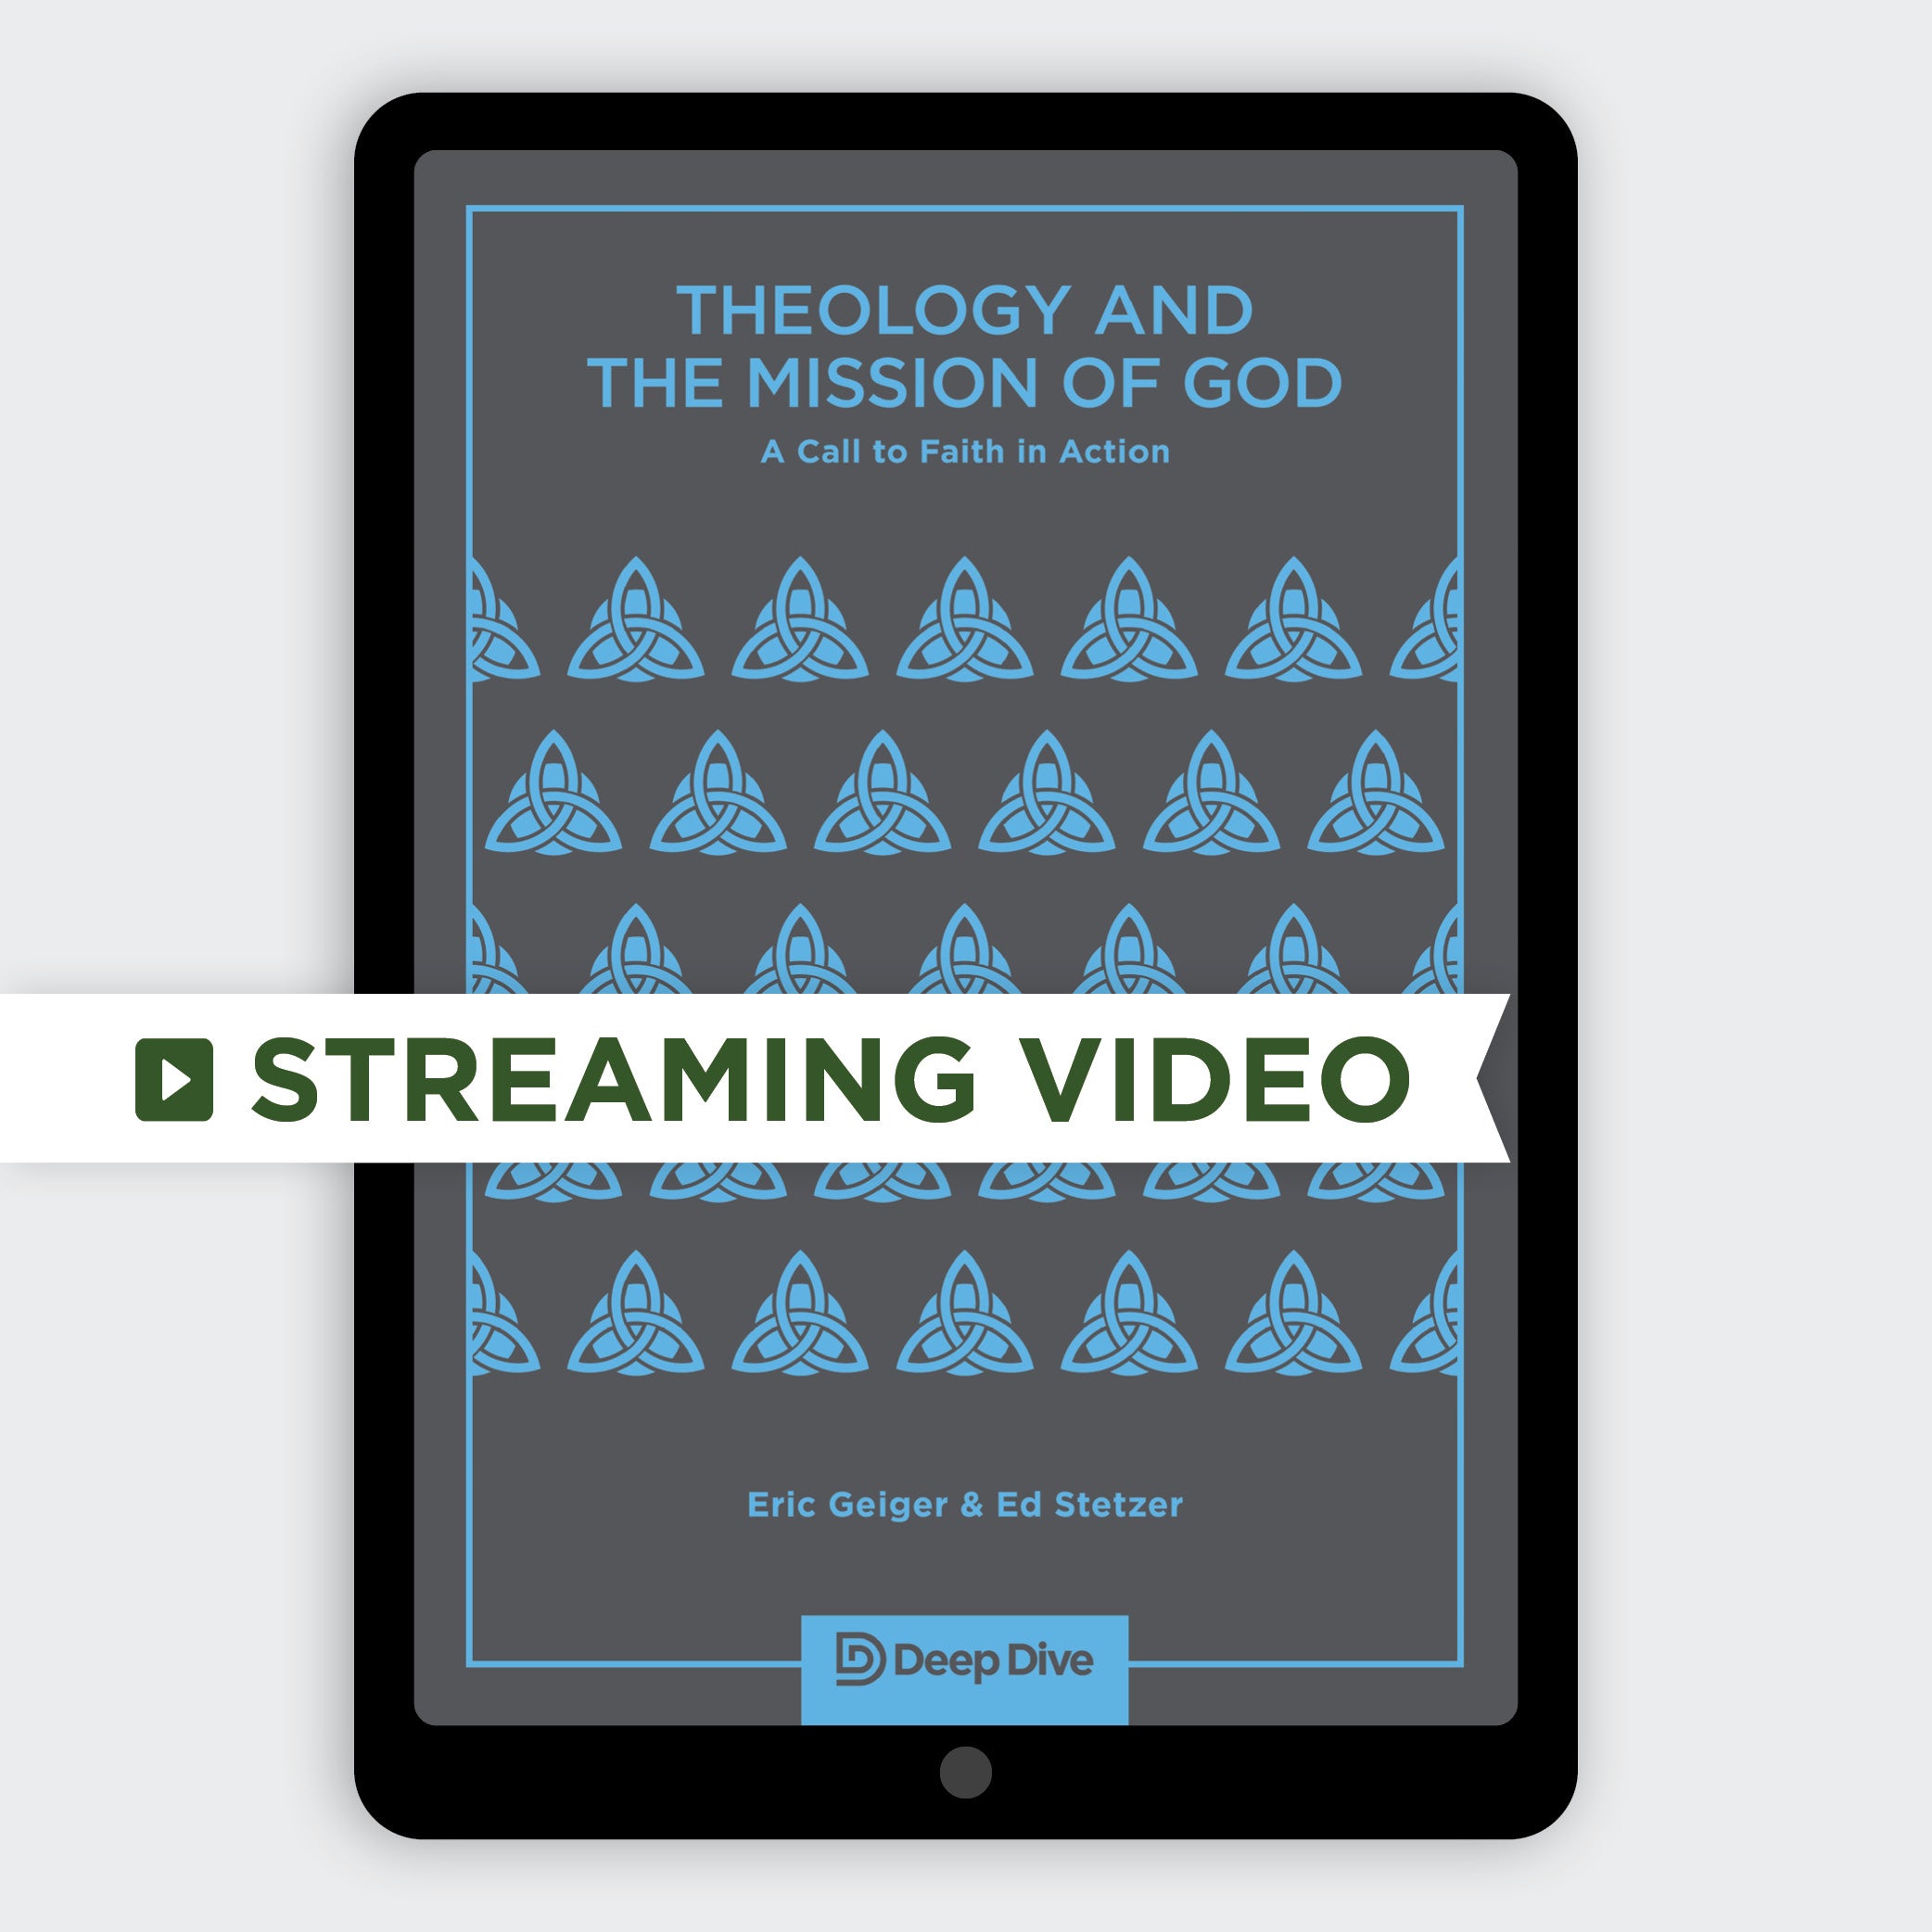 Theology and the Mission of God - Teaching Videos